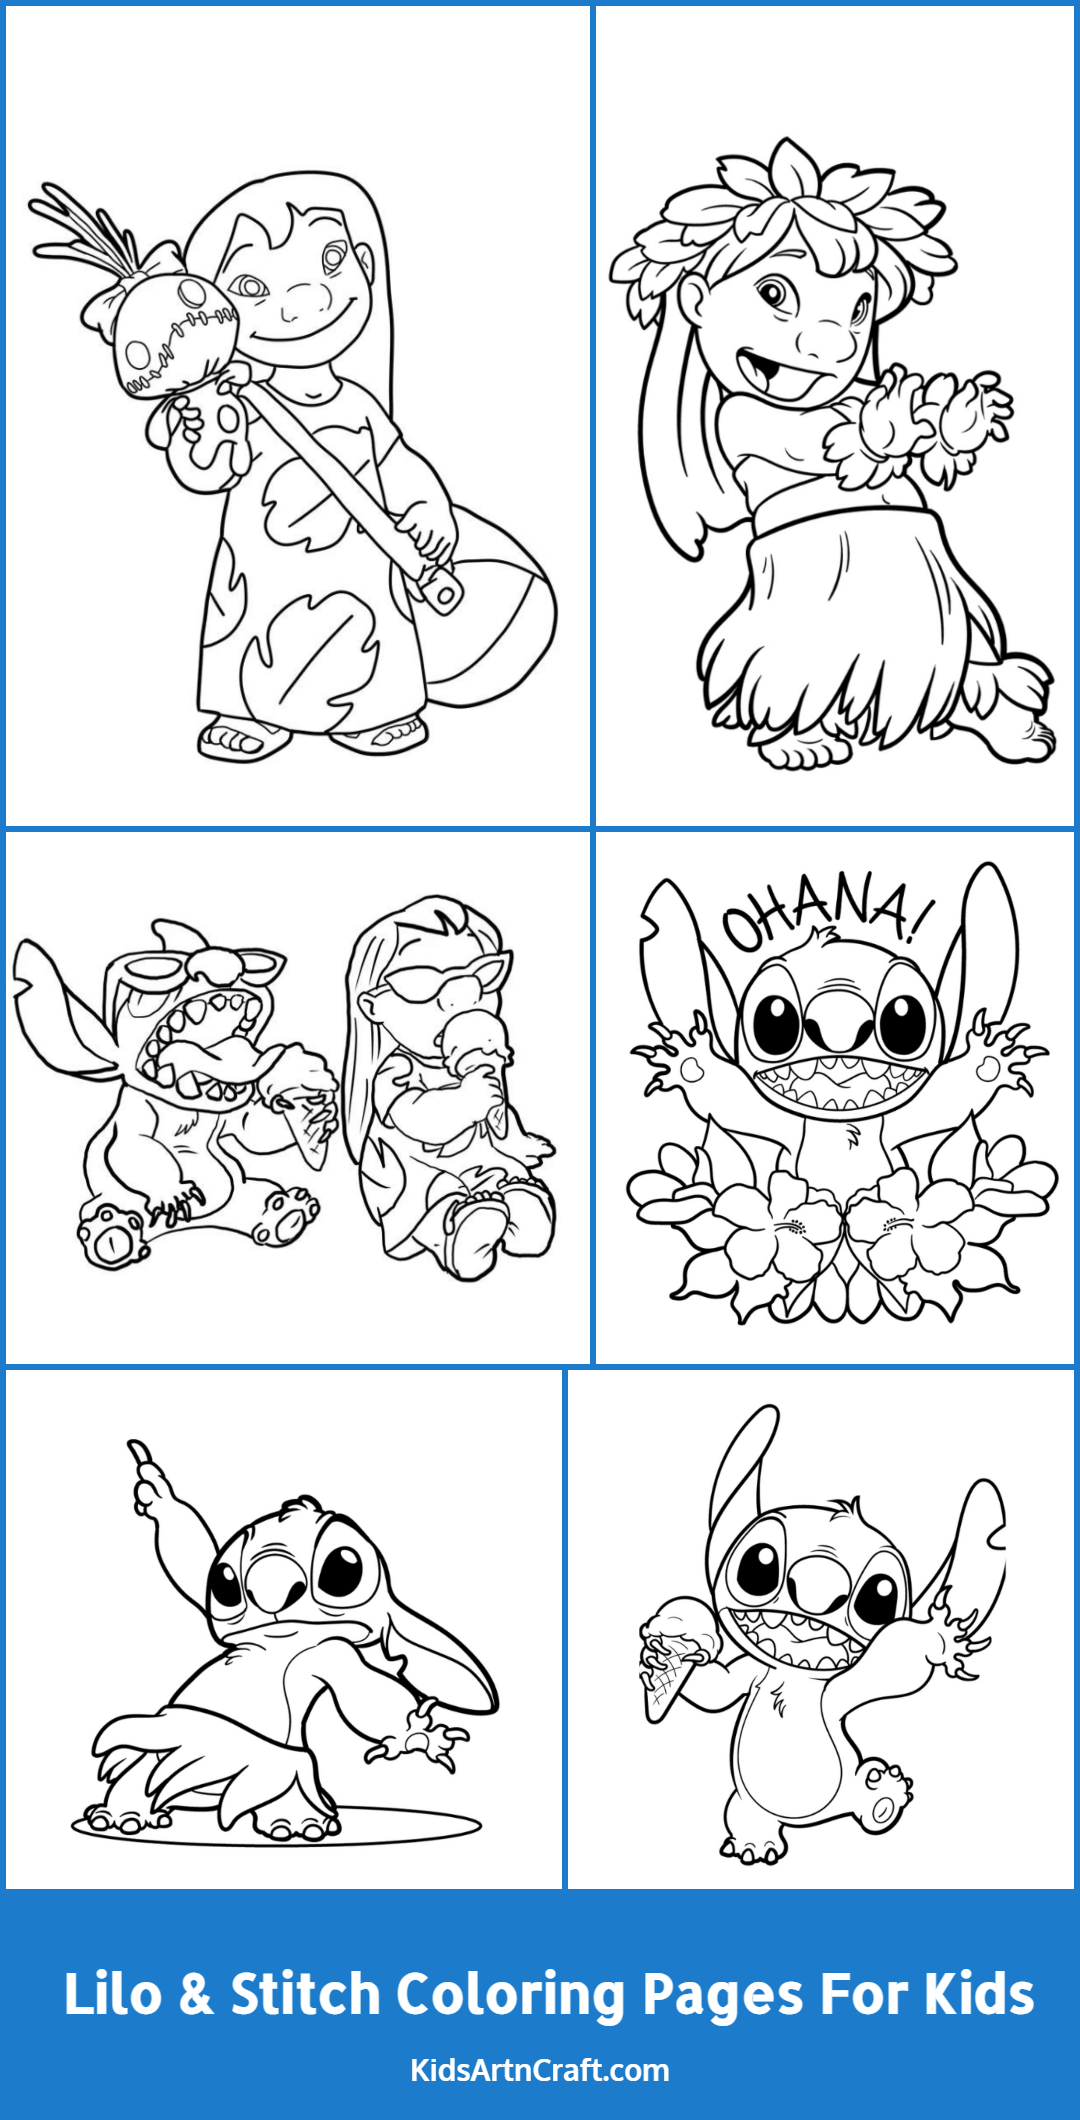 Lilo & Stitch Coloring Pages For Kids – Free Printables